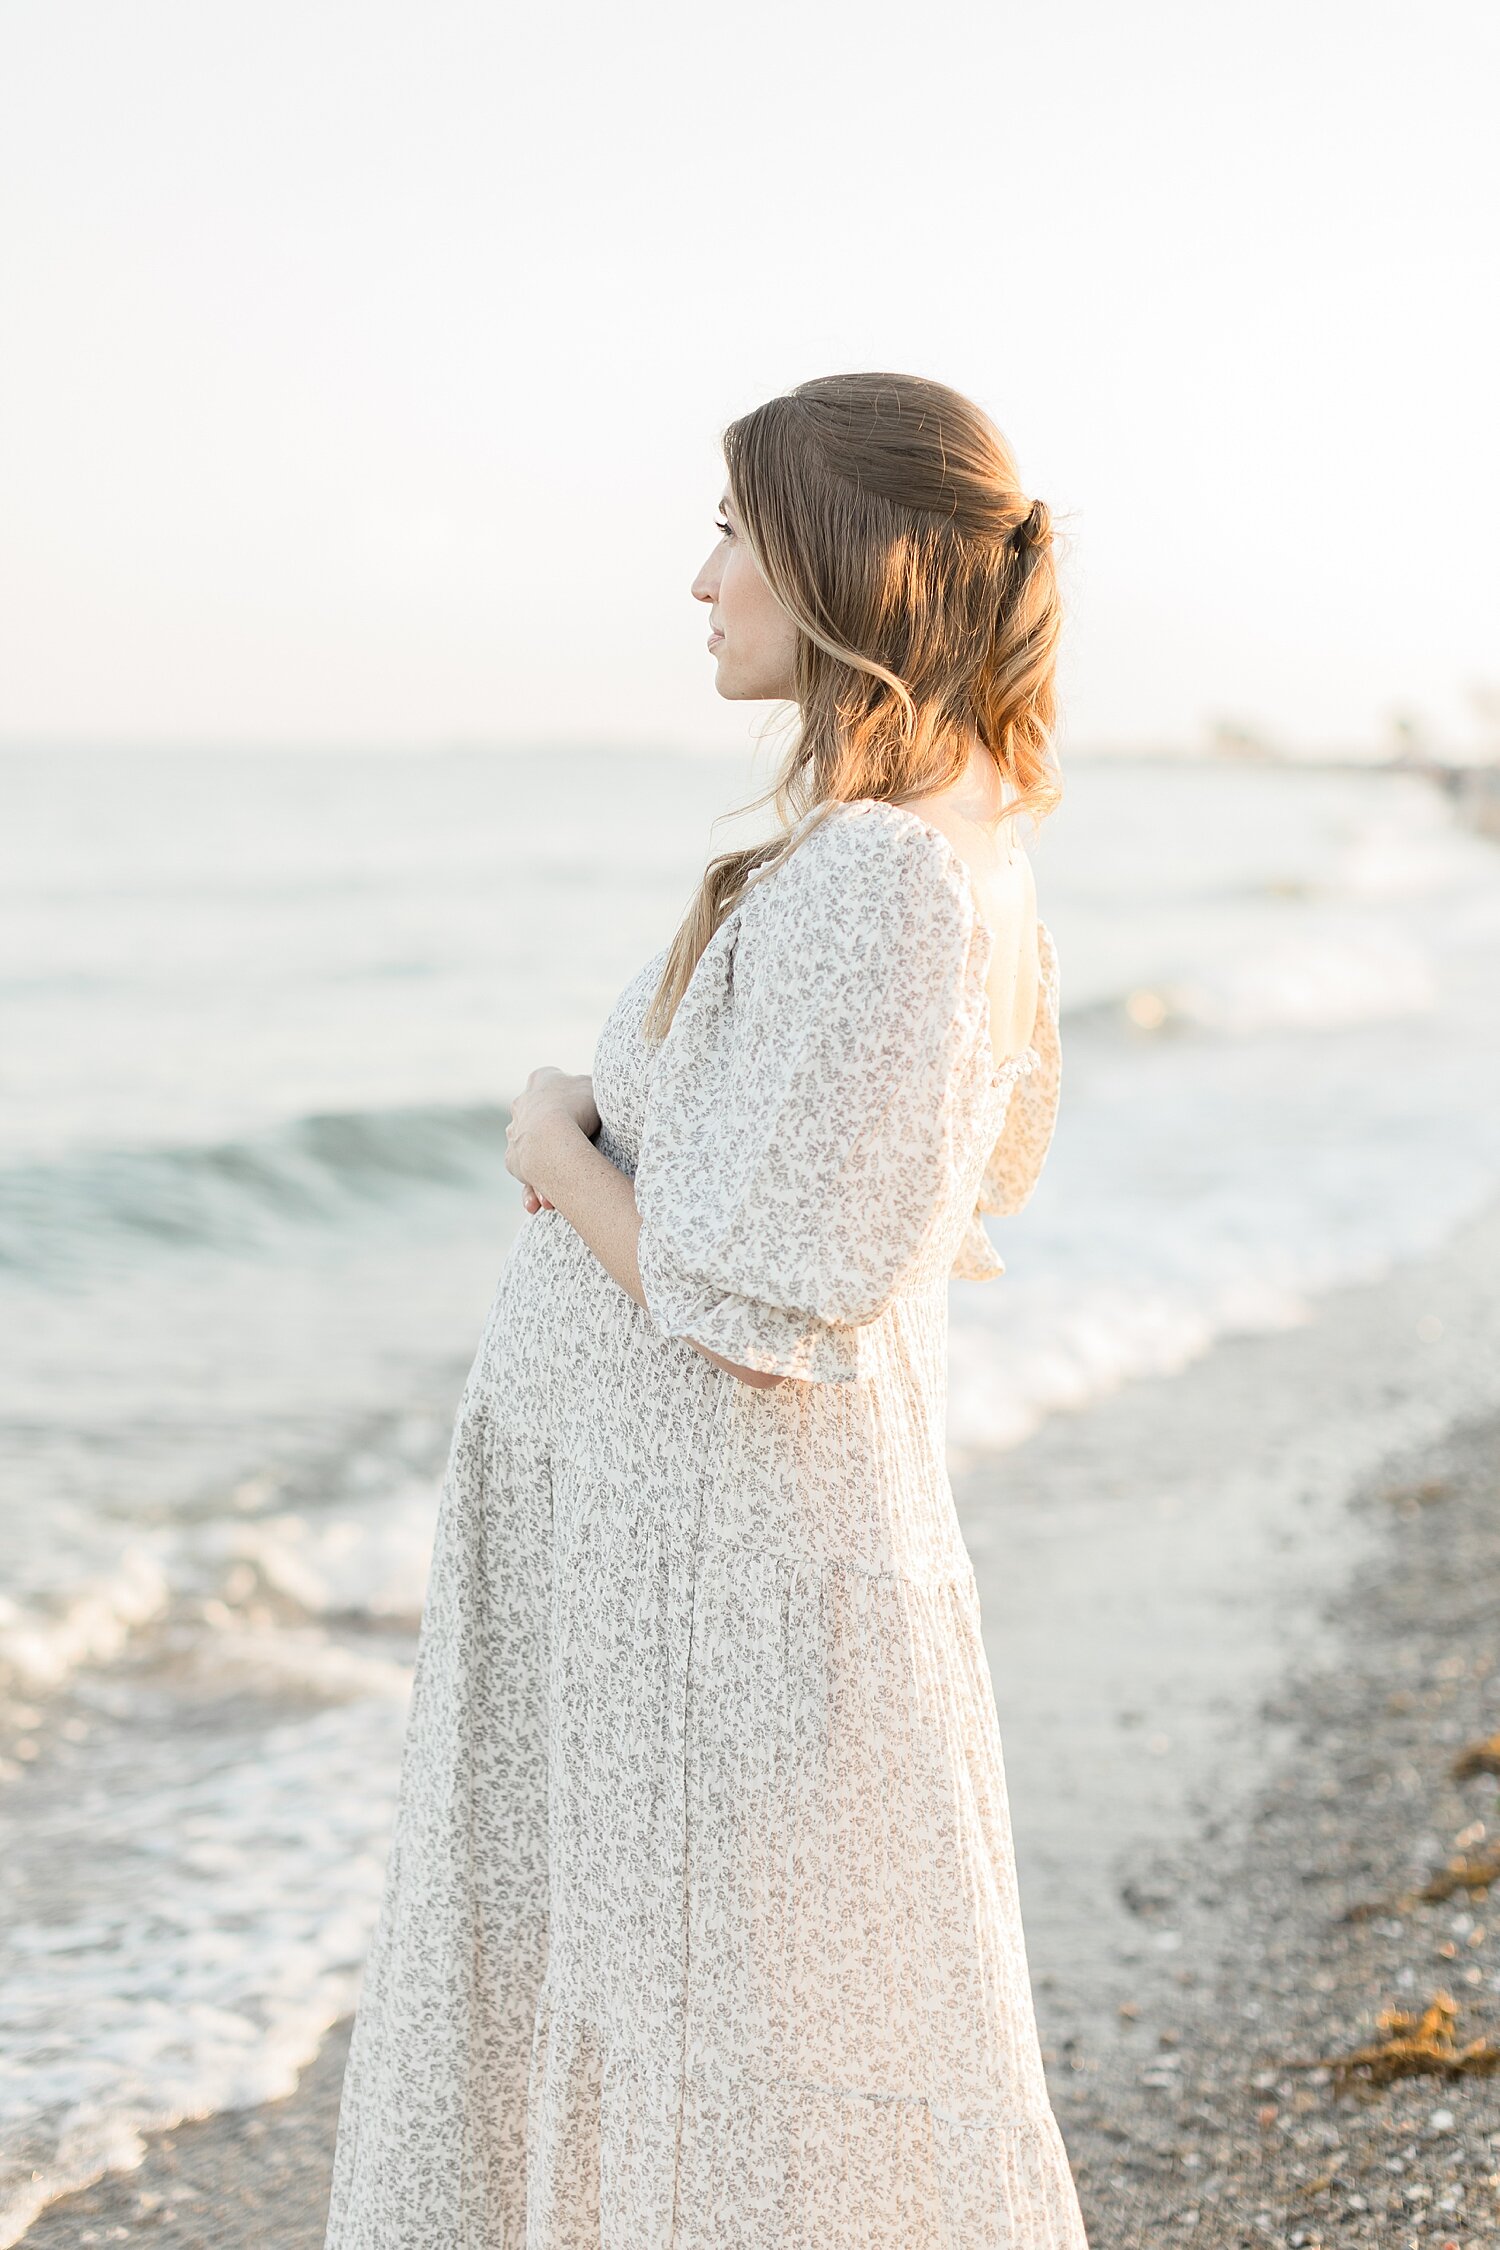 Pregnant mom looking out over the water in Westport, CT | Kristin Wood Photography